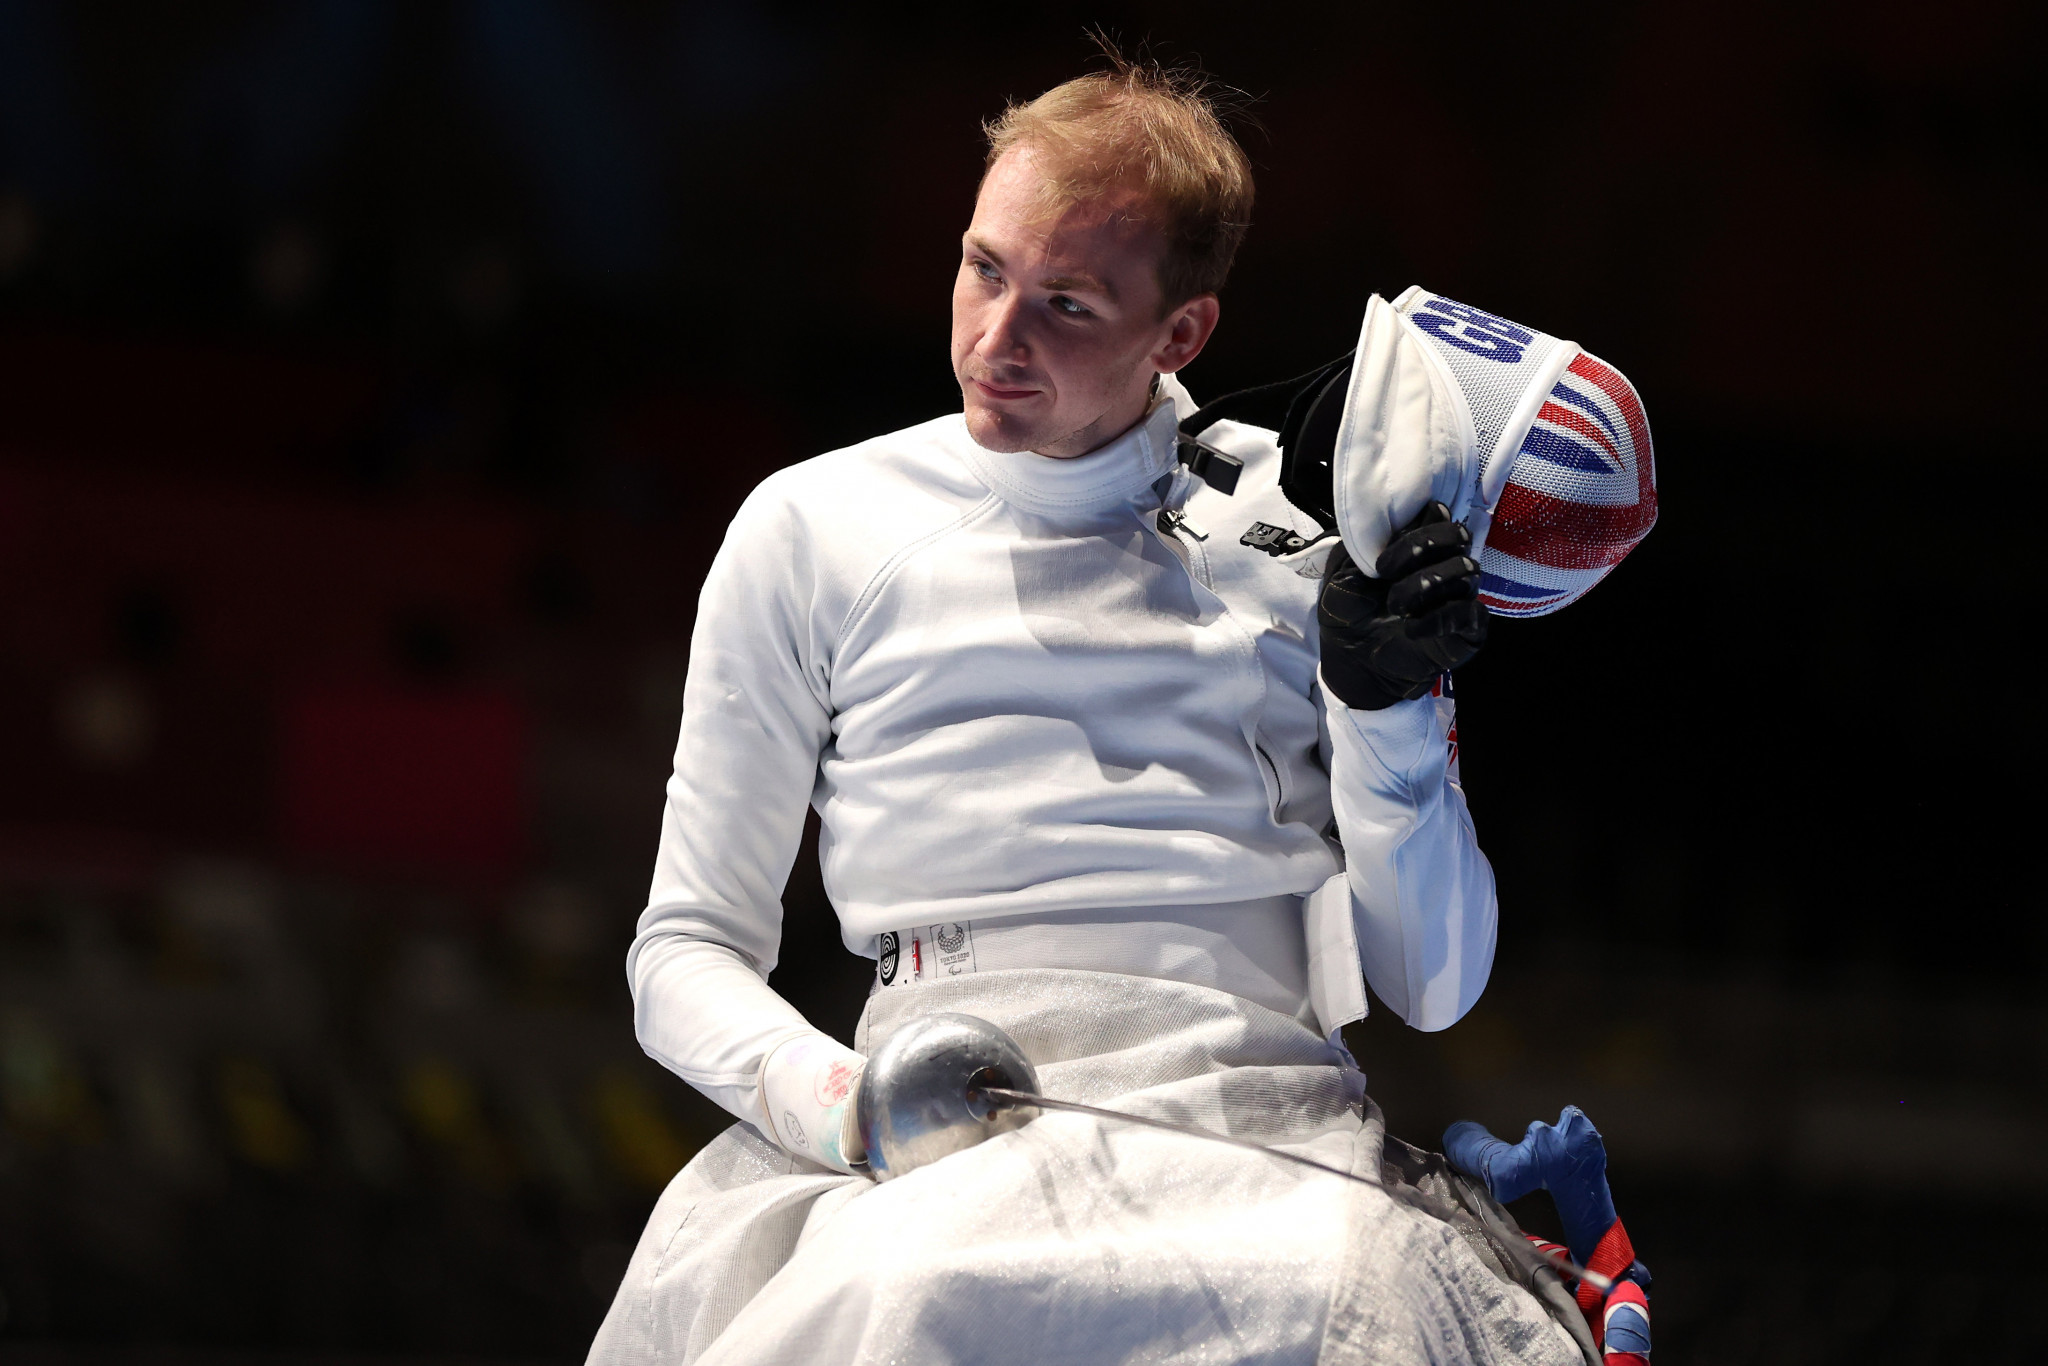 Piers Gilliver won gold in the Para men’s epee category A event in London ©Getty Images